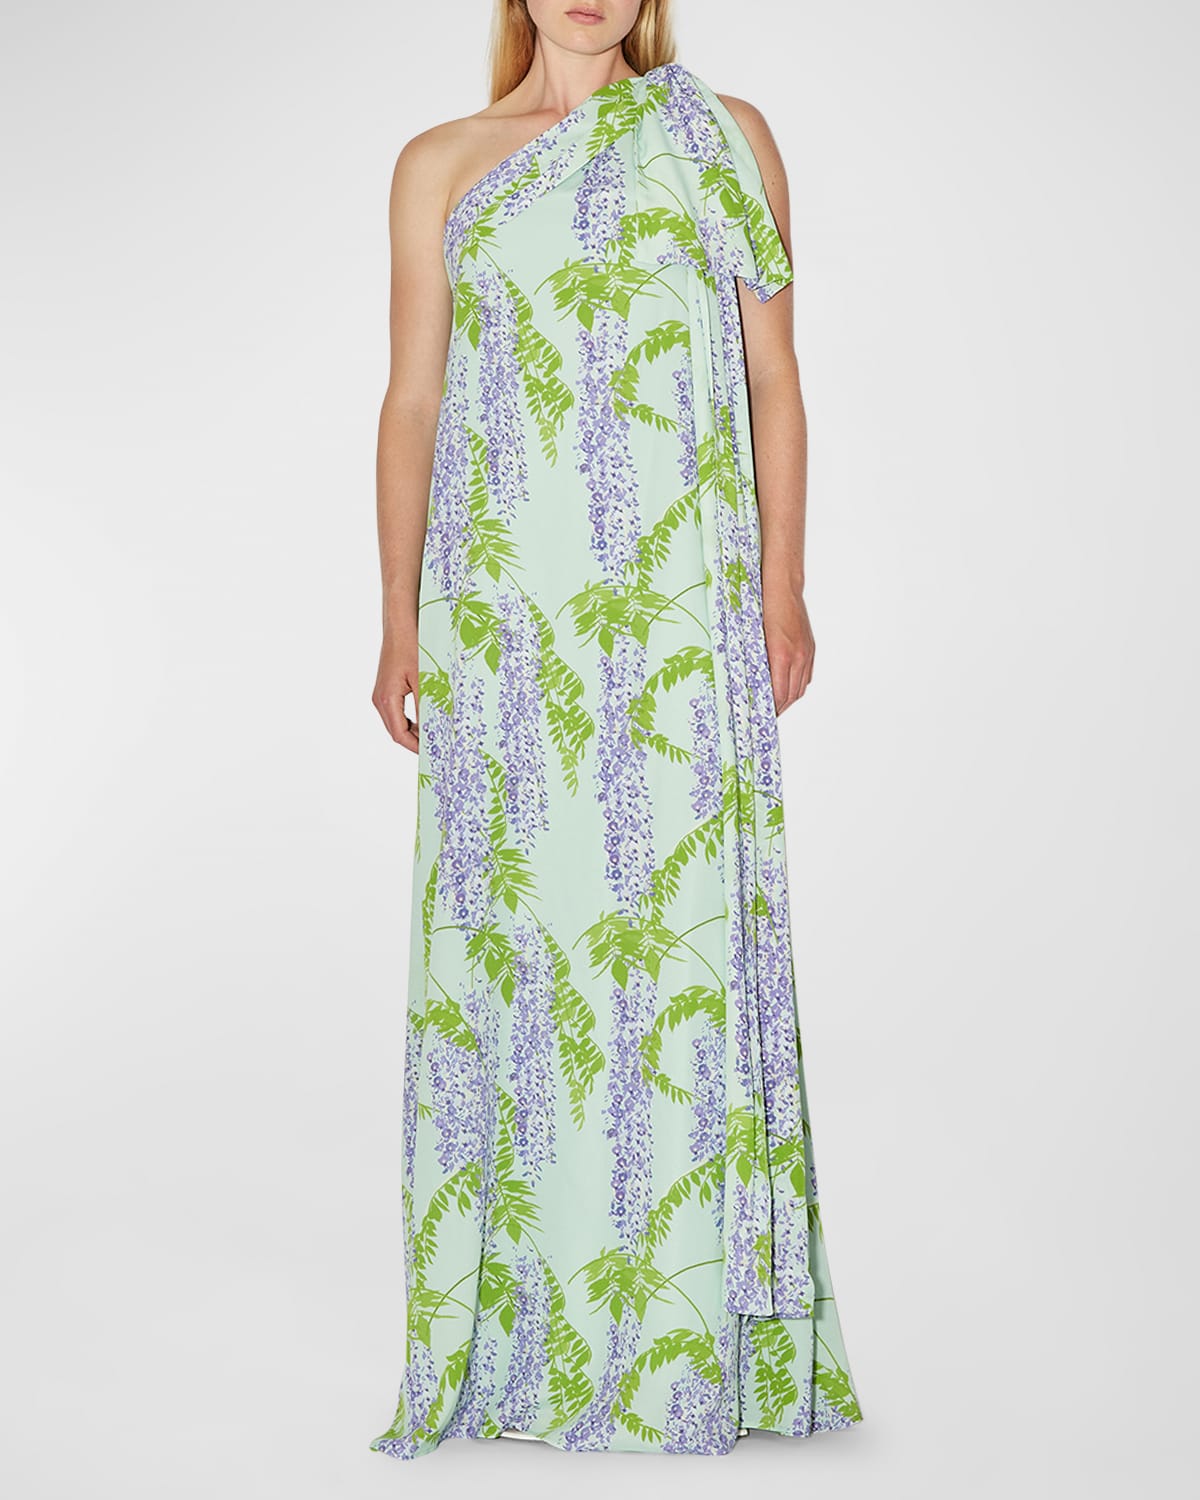 Gala One-Shoulder Wisteria Printed Maxi Dress with Bow Detail